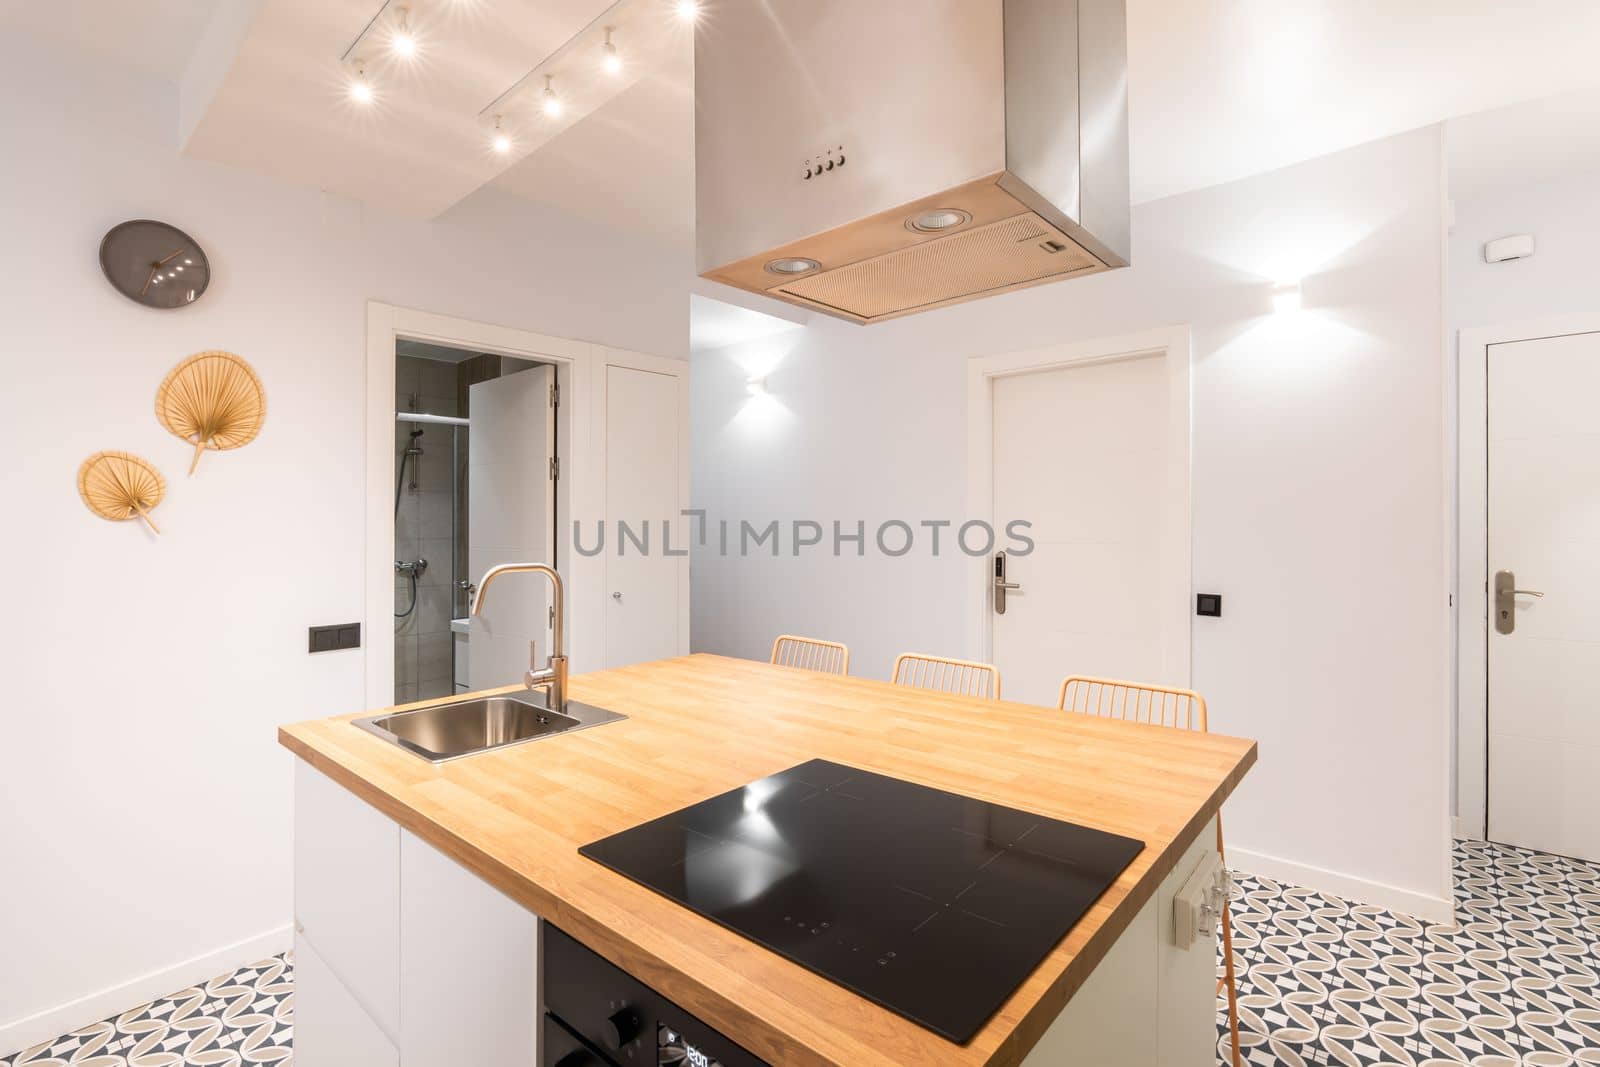 An island table in spacious studio kitchen in modern apartment with trendy author's design. On wooden surface there is an induction electric stove above it with an exhaust system. Mosaic tile floor. by apavlin